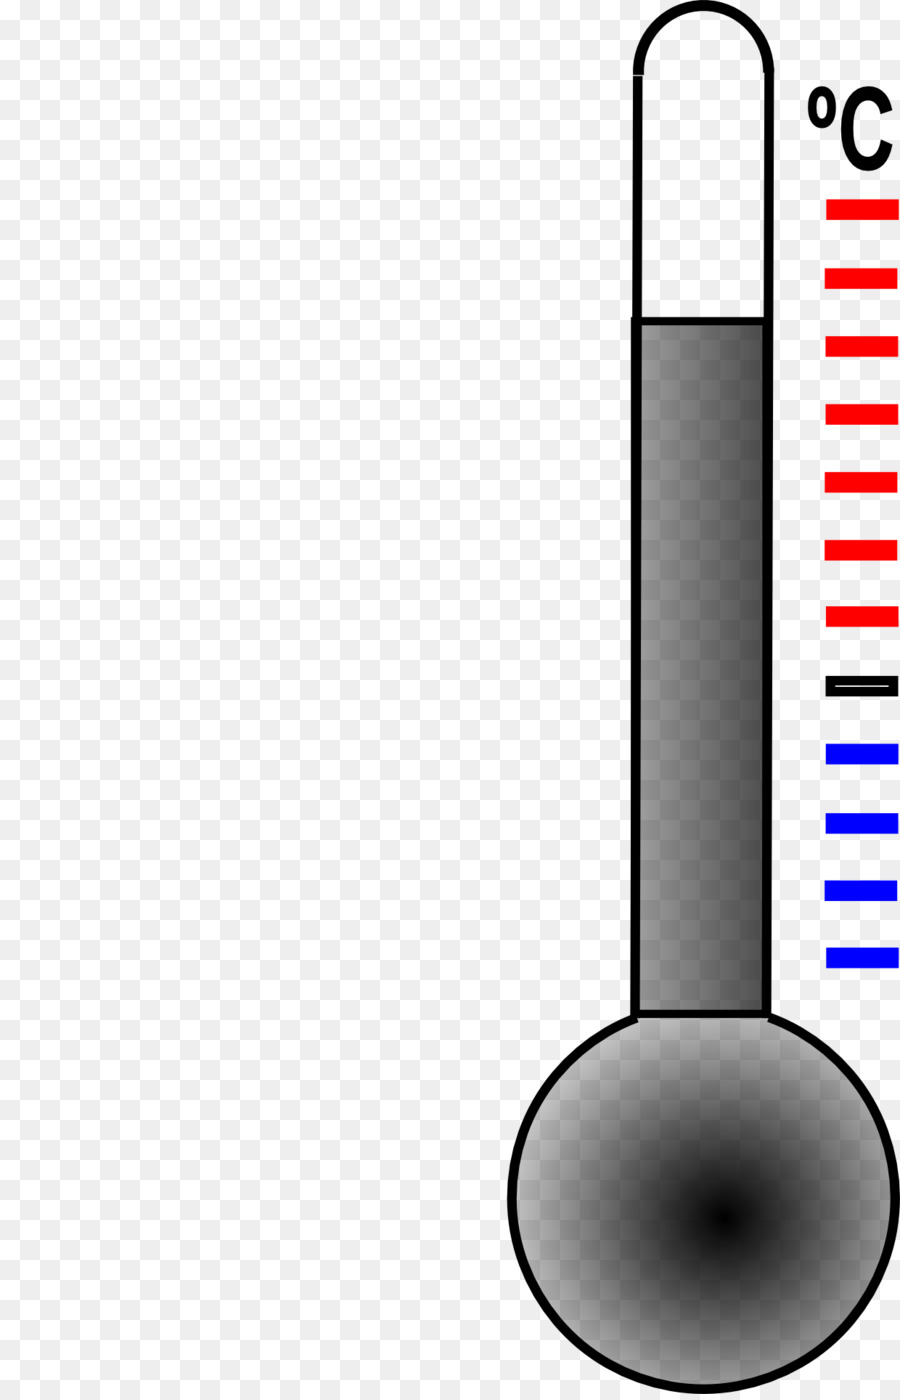 Atmosphärische thermometer Clip art - andere